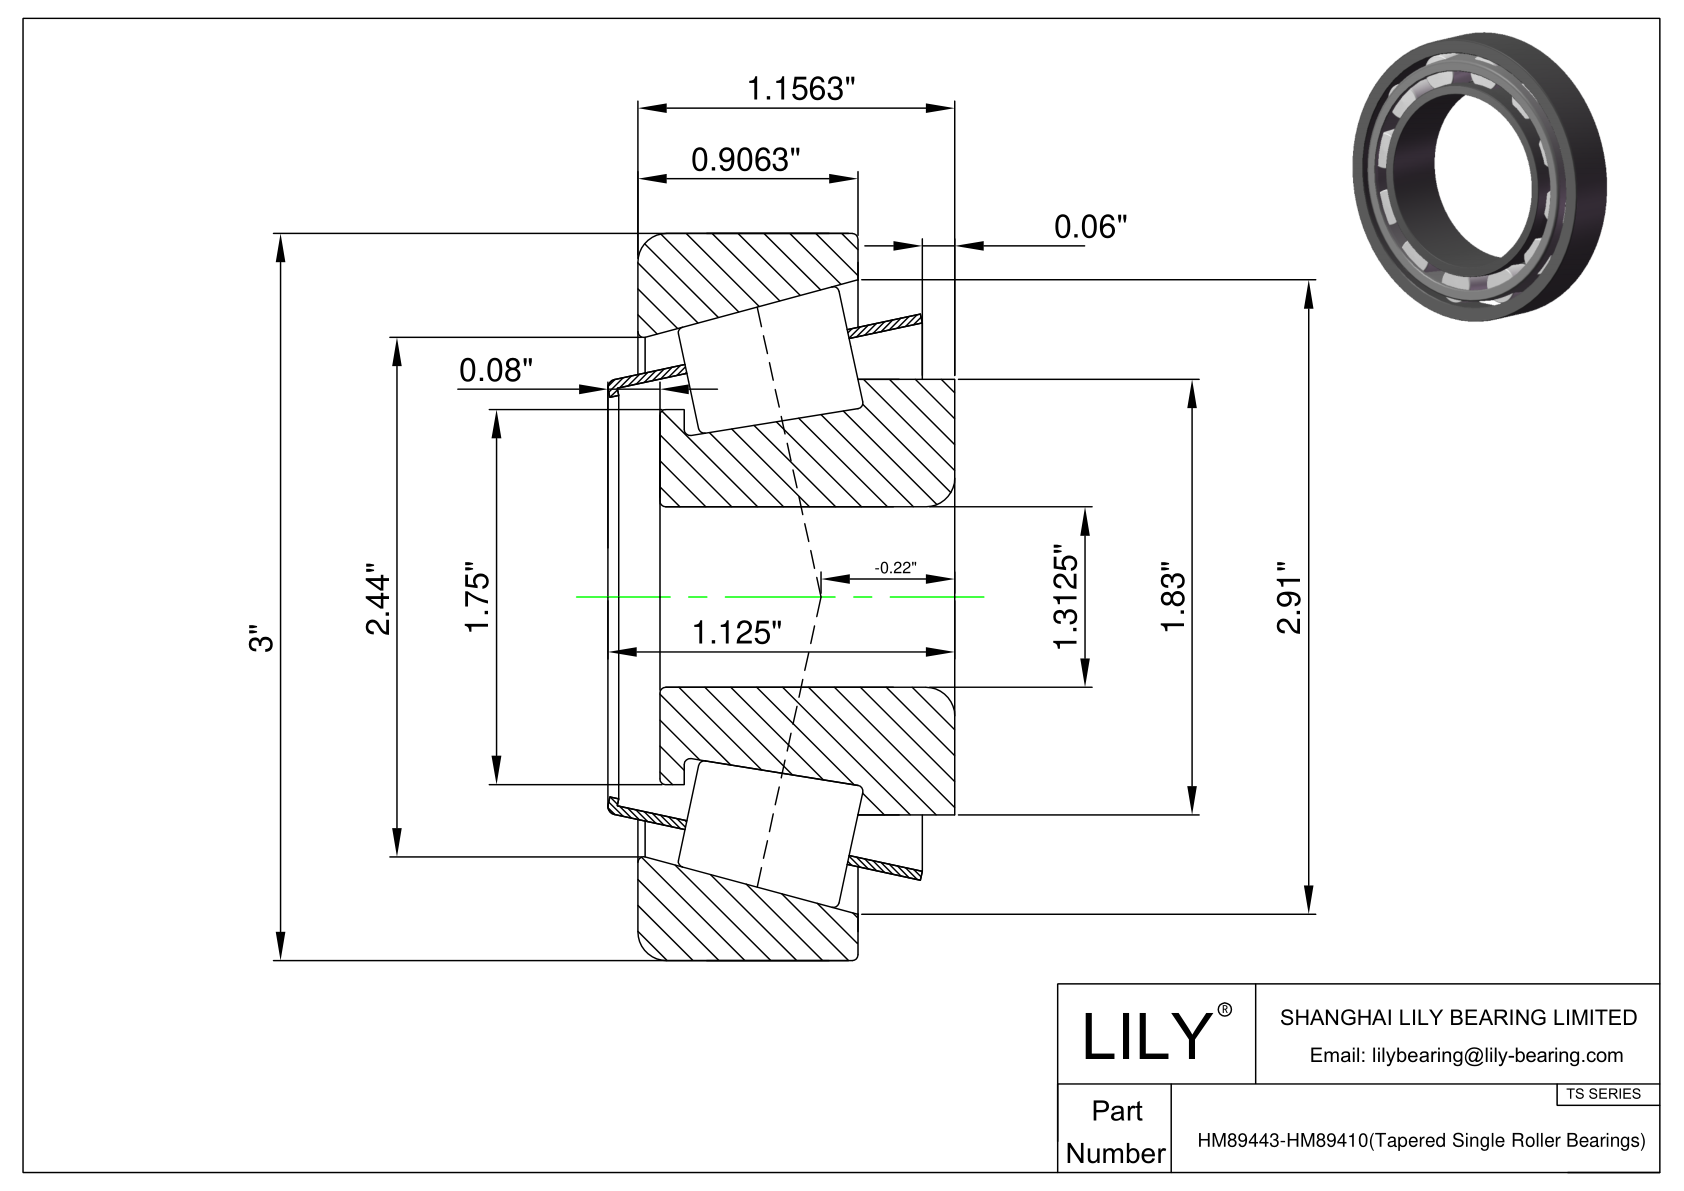 HM89443-HM89410 TS (Tapered Single Roller Bearings) (Imperial) cad drawing